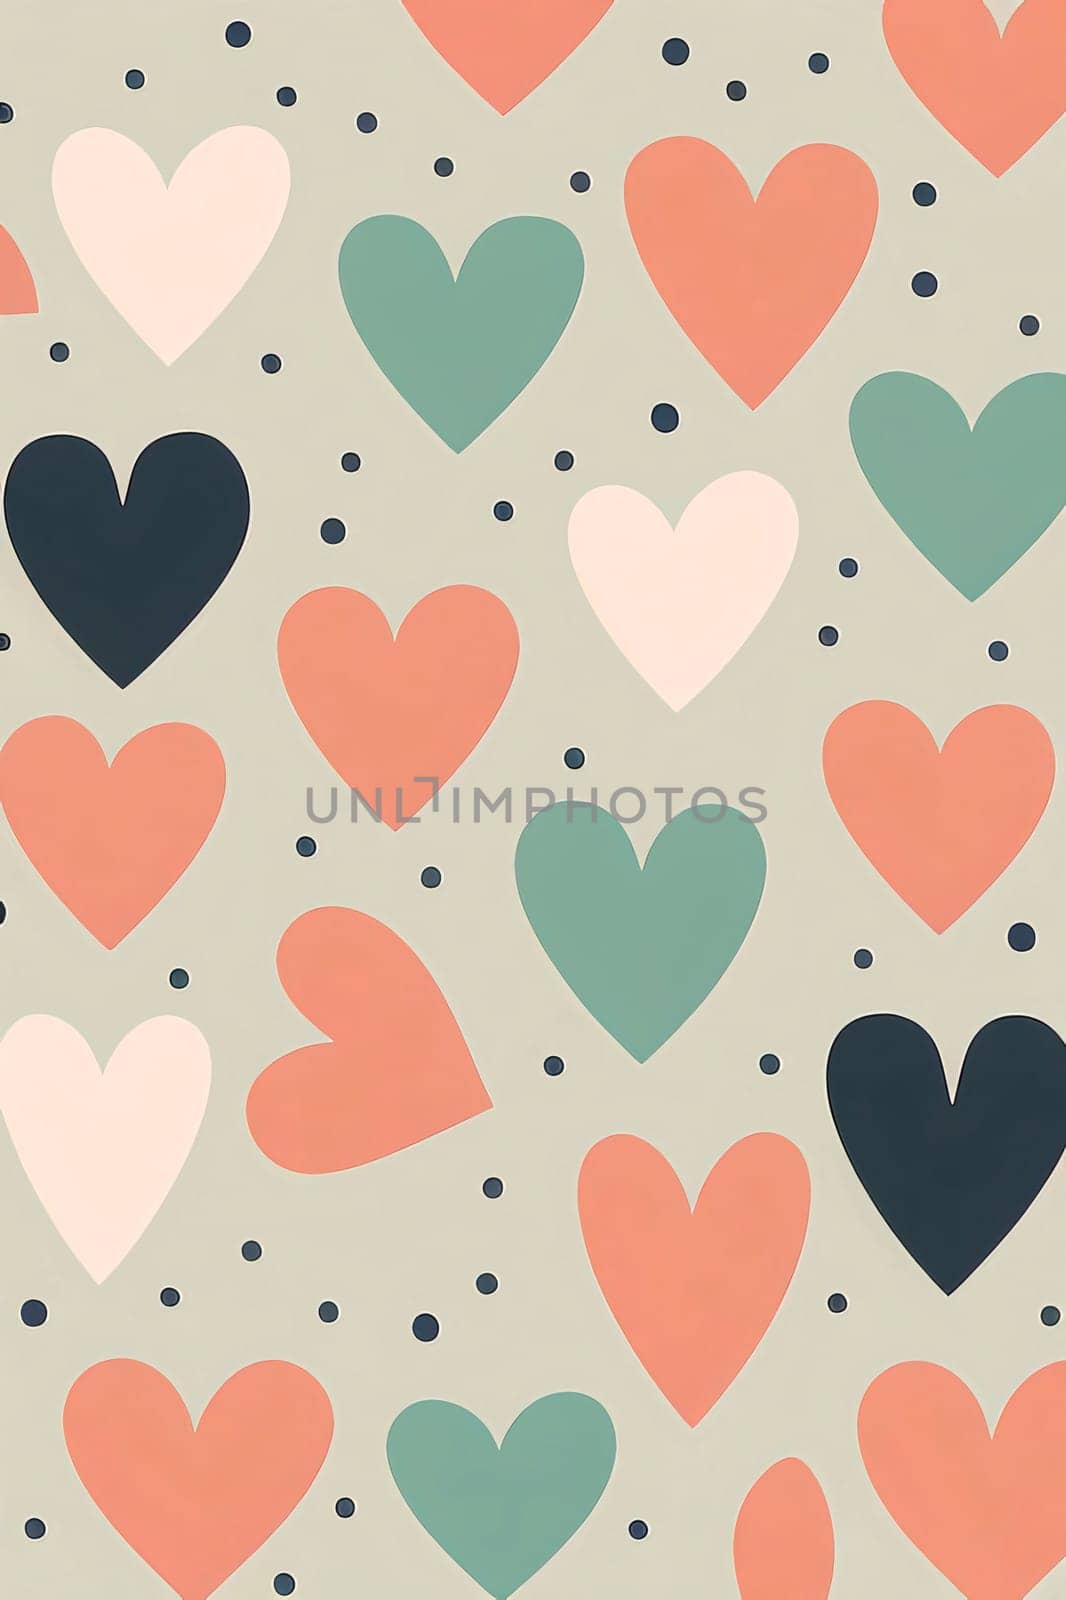 Elegant and modern. Colorful hearts with dots as abstract background, wallpaper, banner, texture design with pattern - vector.